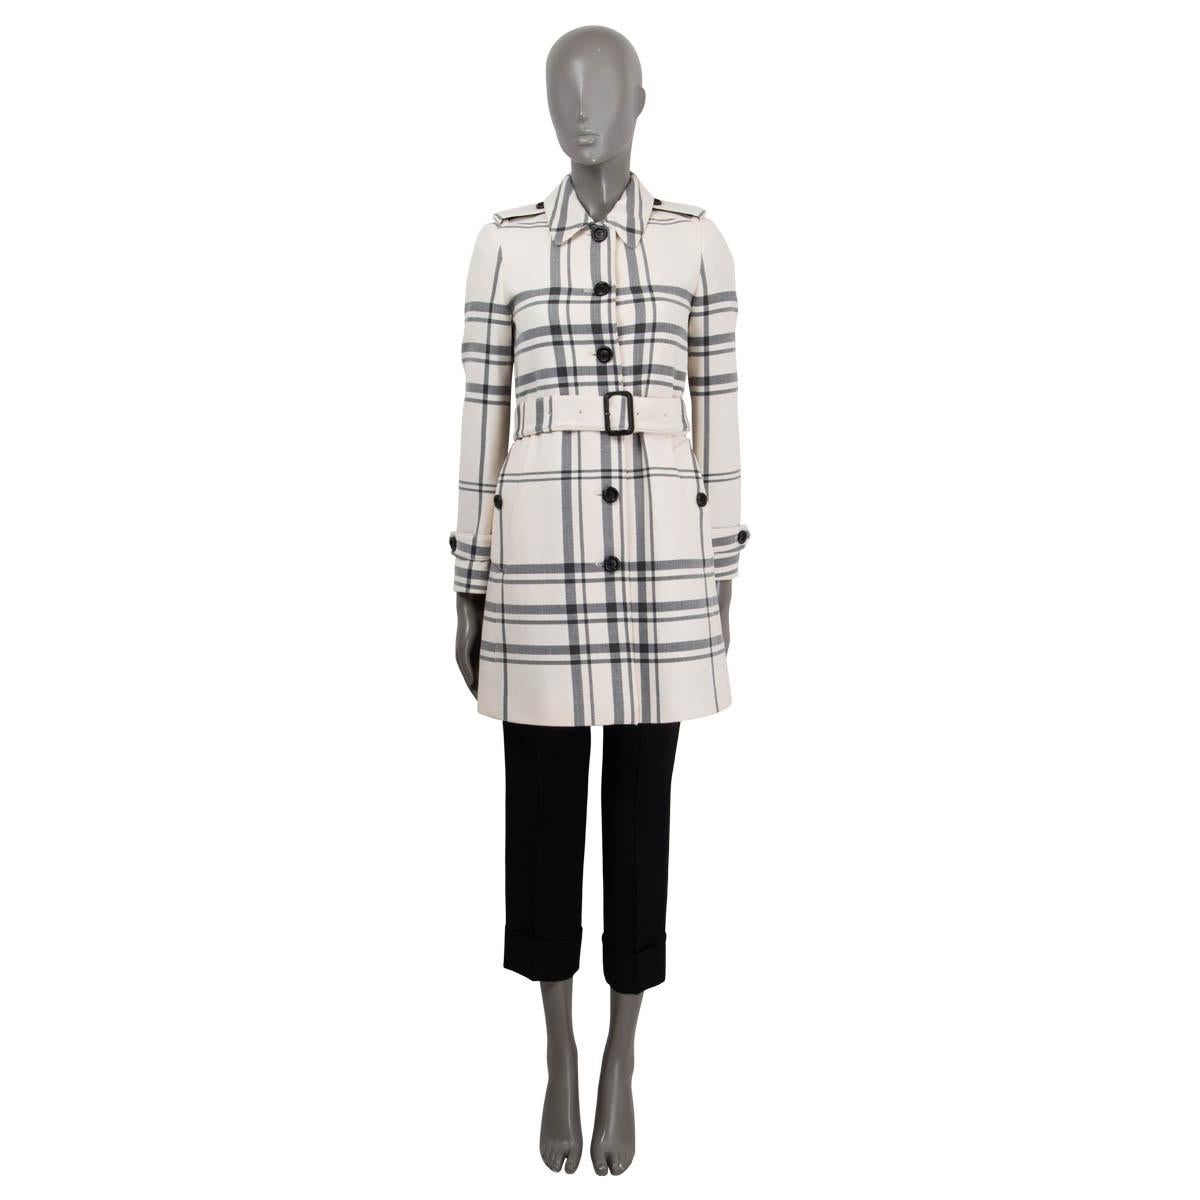 100% authentic Burberry London belted single breasted trench coat in off-white and charcoal polyester (52%), virgin wool (43%) and elastane (3%). Features epaulettes on the shoulders and cuffs, a detachable belt and two buttoned slit pockets on the